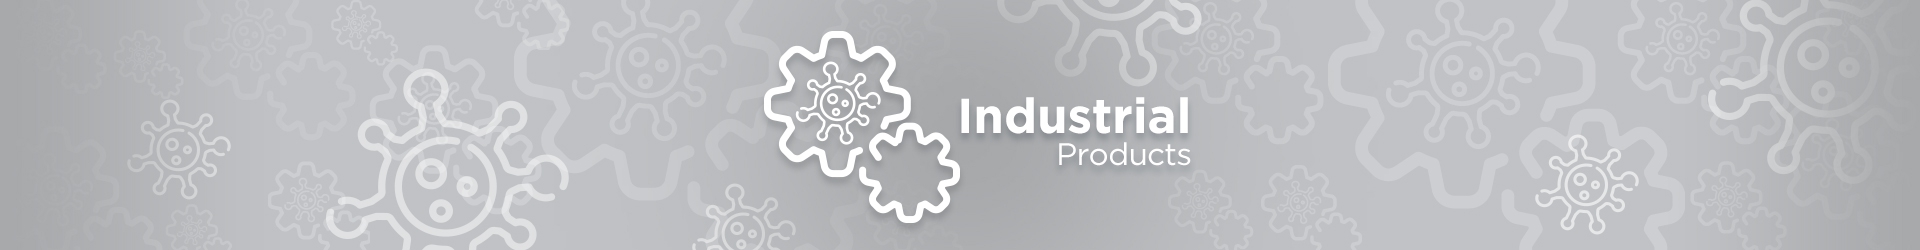 Industrial Products Inslider